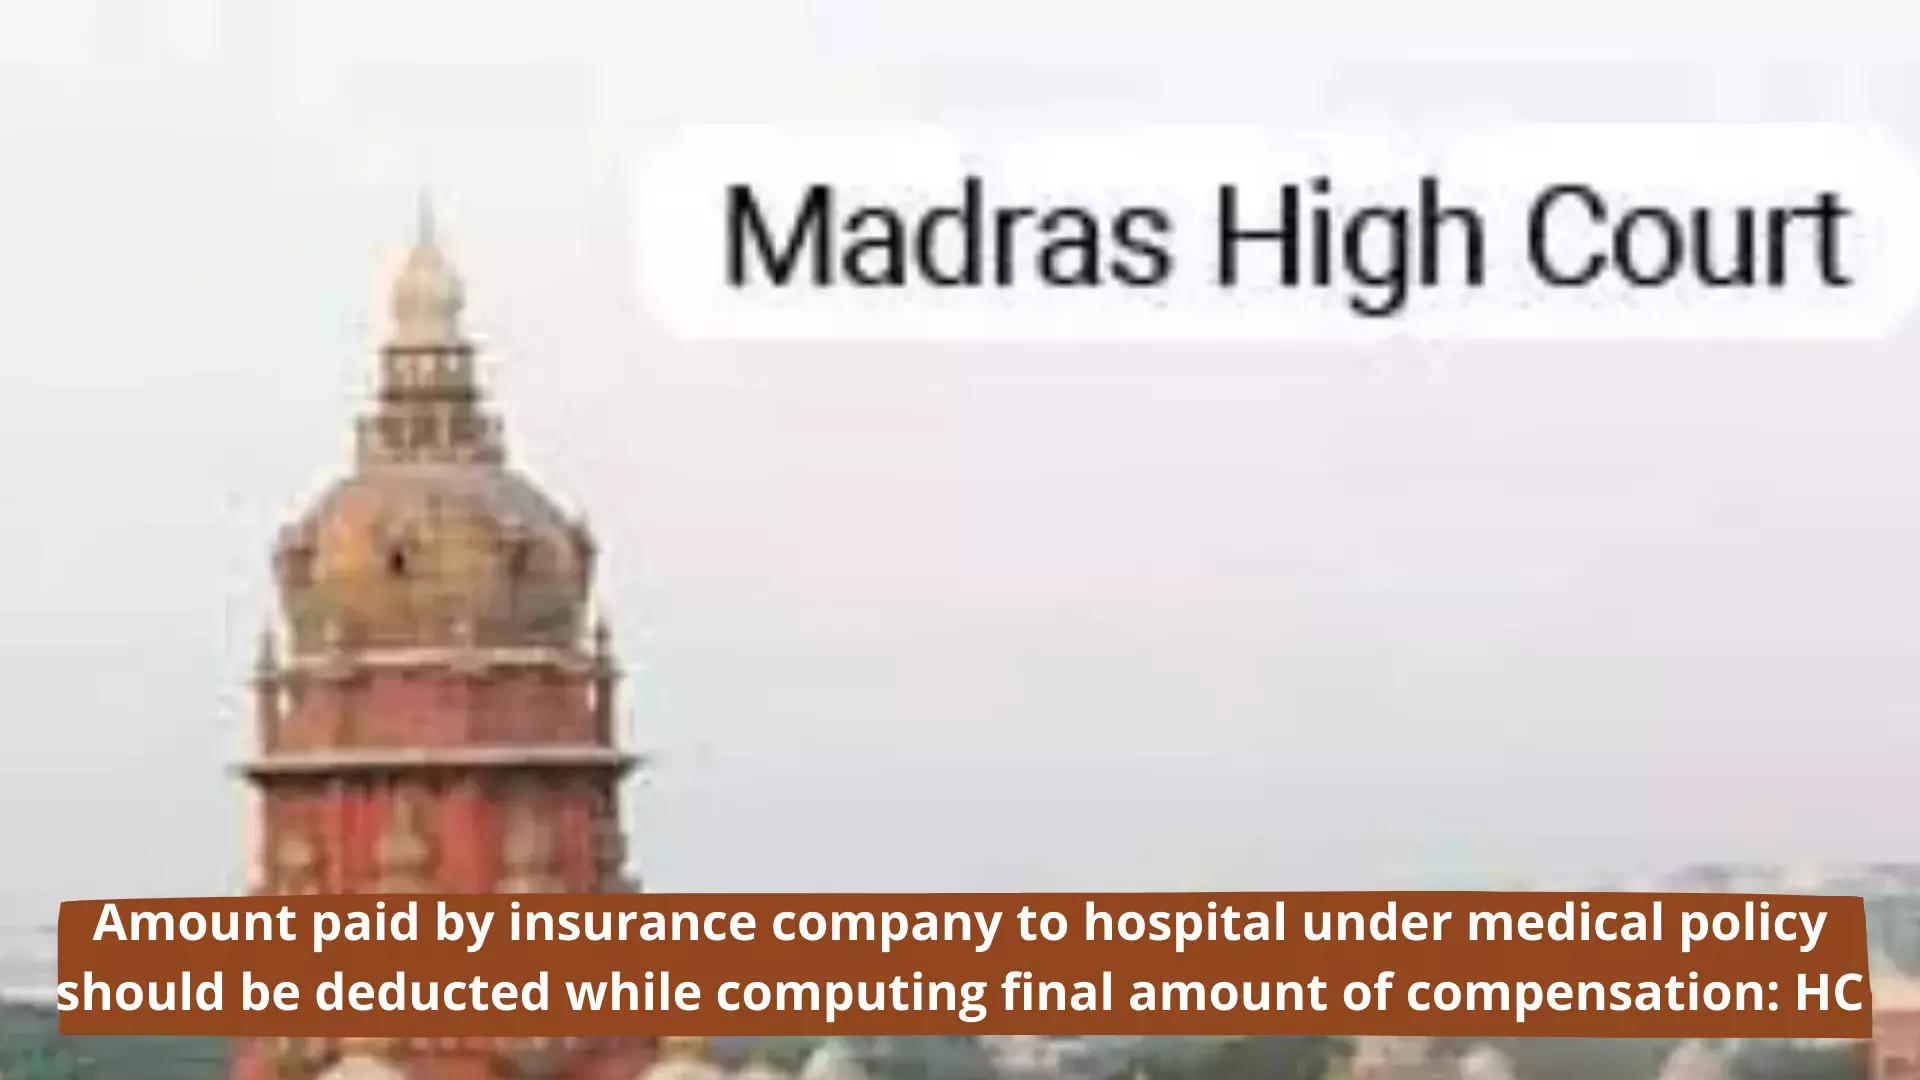 Amount paid by insurance company to hospital under medical policy should be deducted while computing final amount of compensation: HC